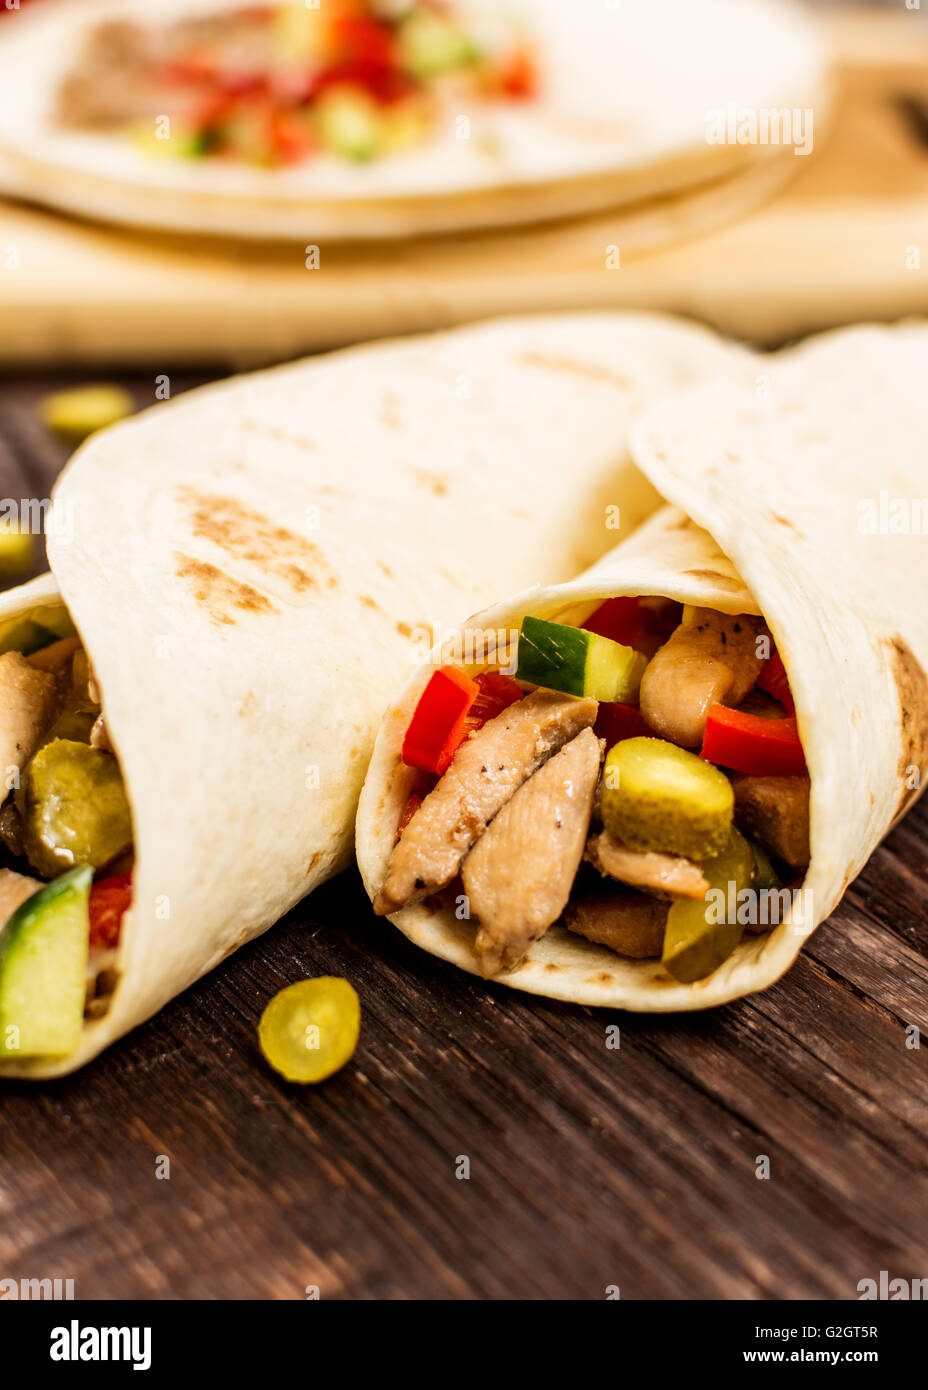 Traditional mexican tortilla wrap with meat and vegetables Stock Photo